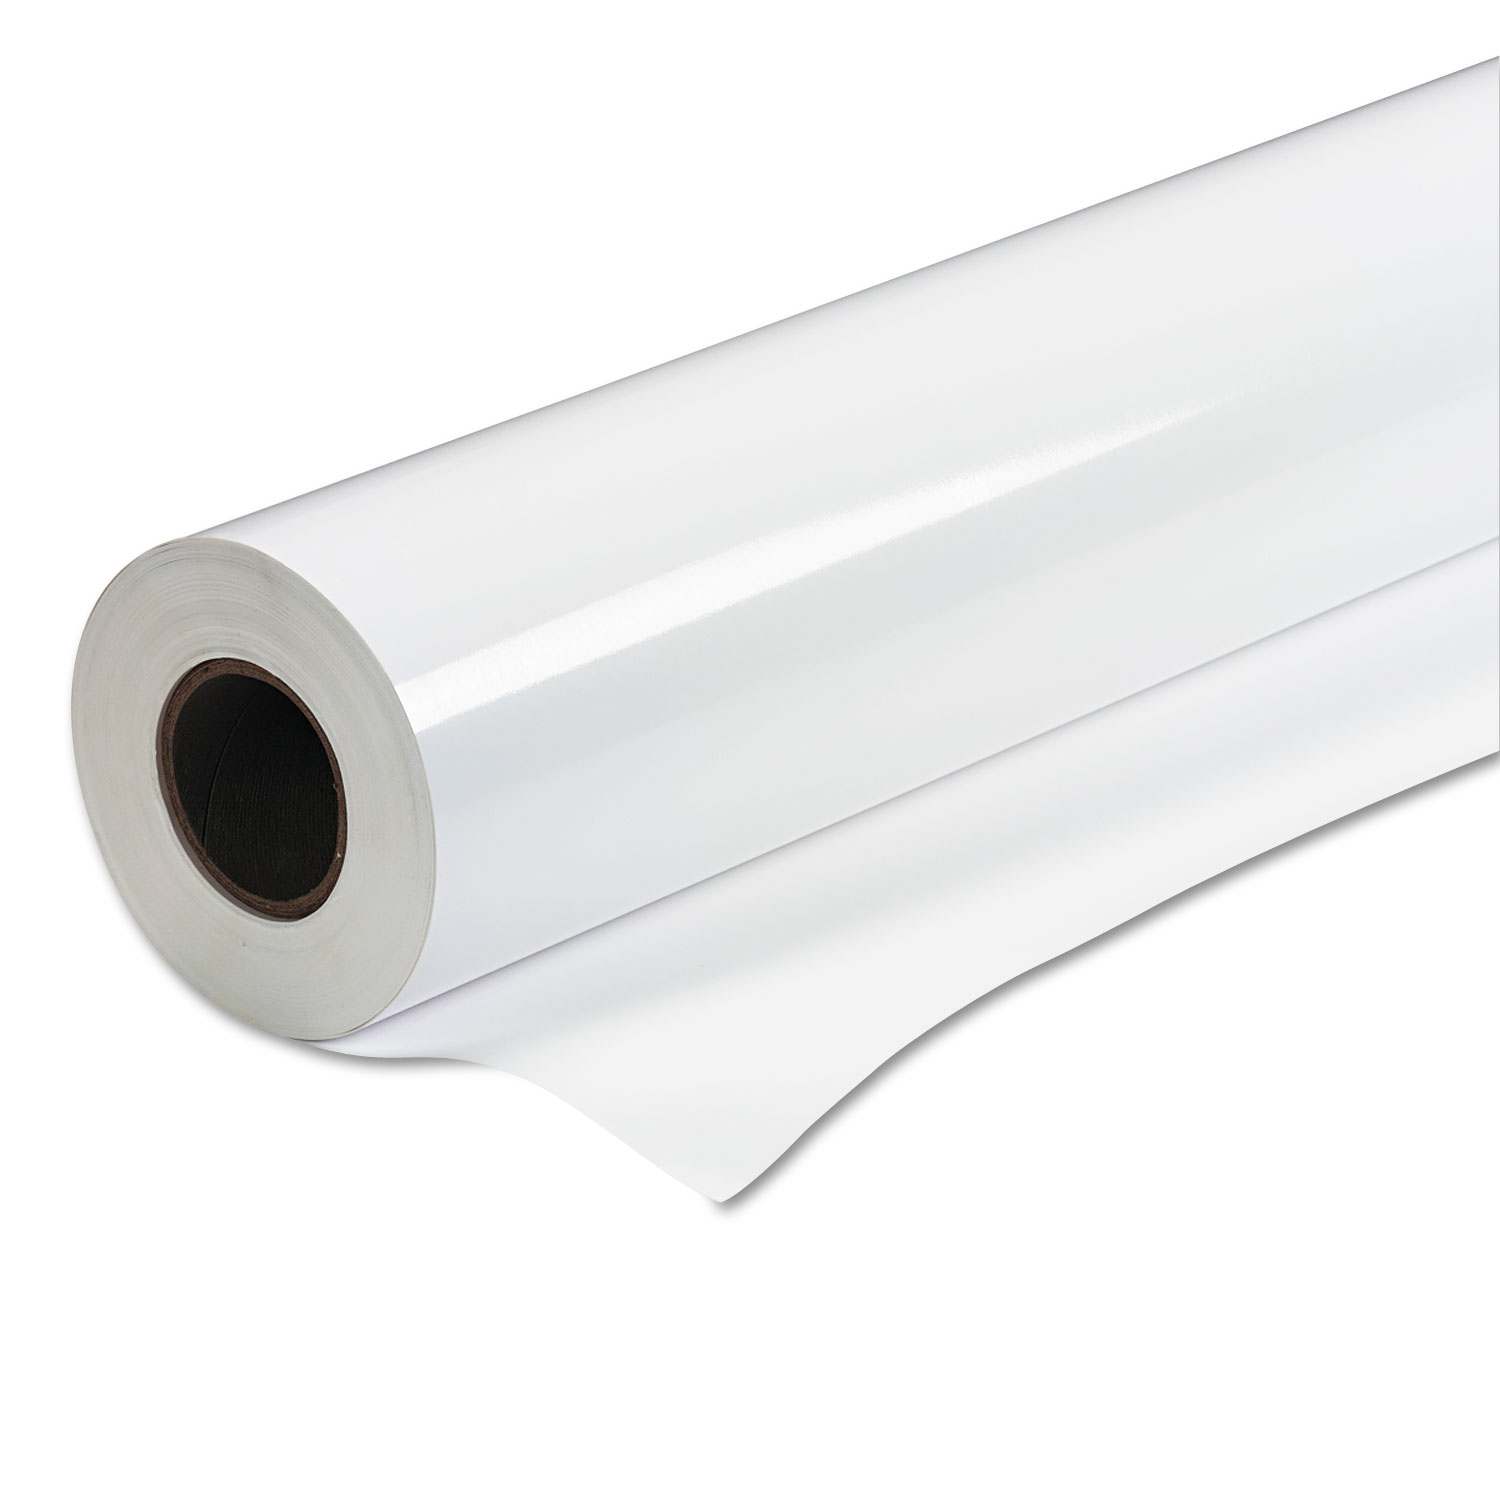 Professional Satin Photo Paper, Glossy, 24 x 75 ft, Roll